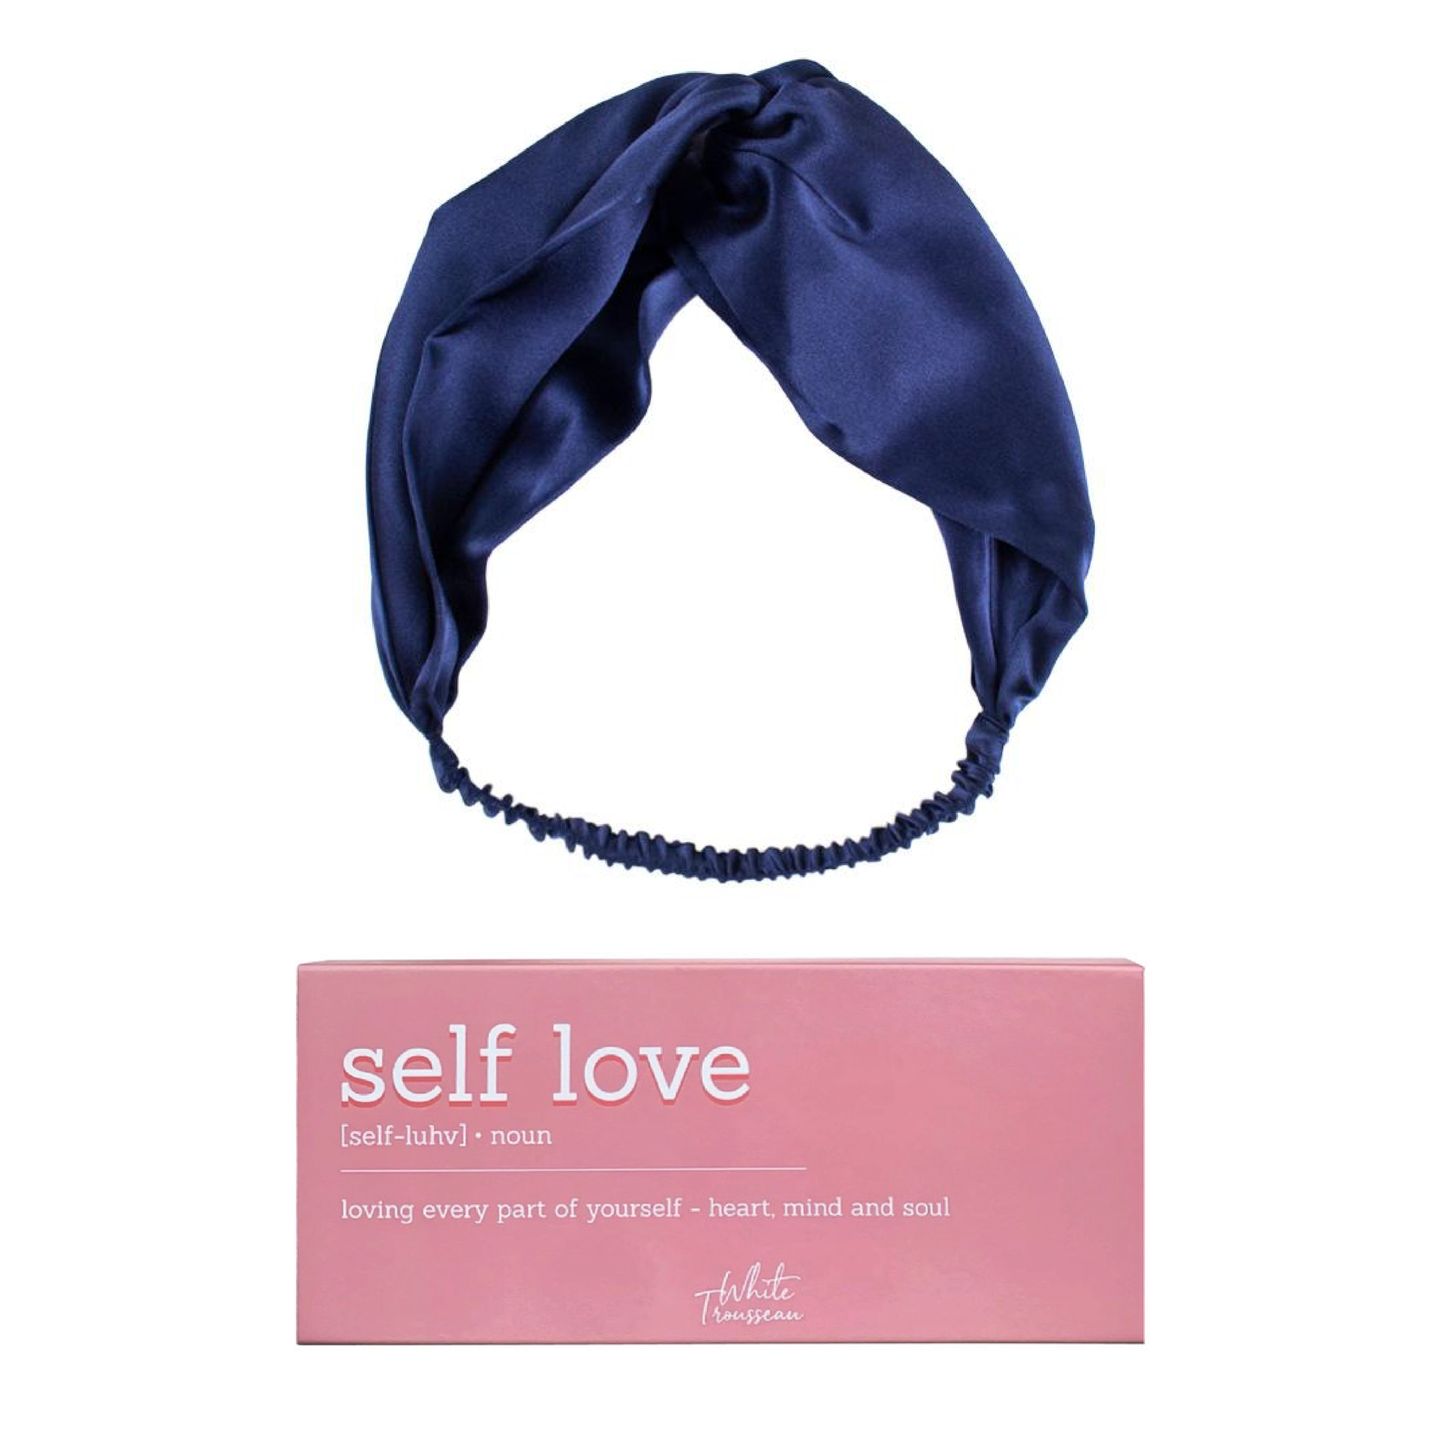 The White Trousseau Mulberry Silk Headband is crafted with 100% 19momme pure mulberry silk, which is ultra-gentle on hair to avoid pulling, snagging, or tugging.